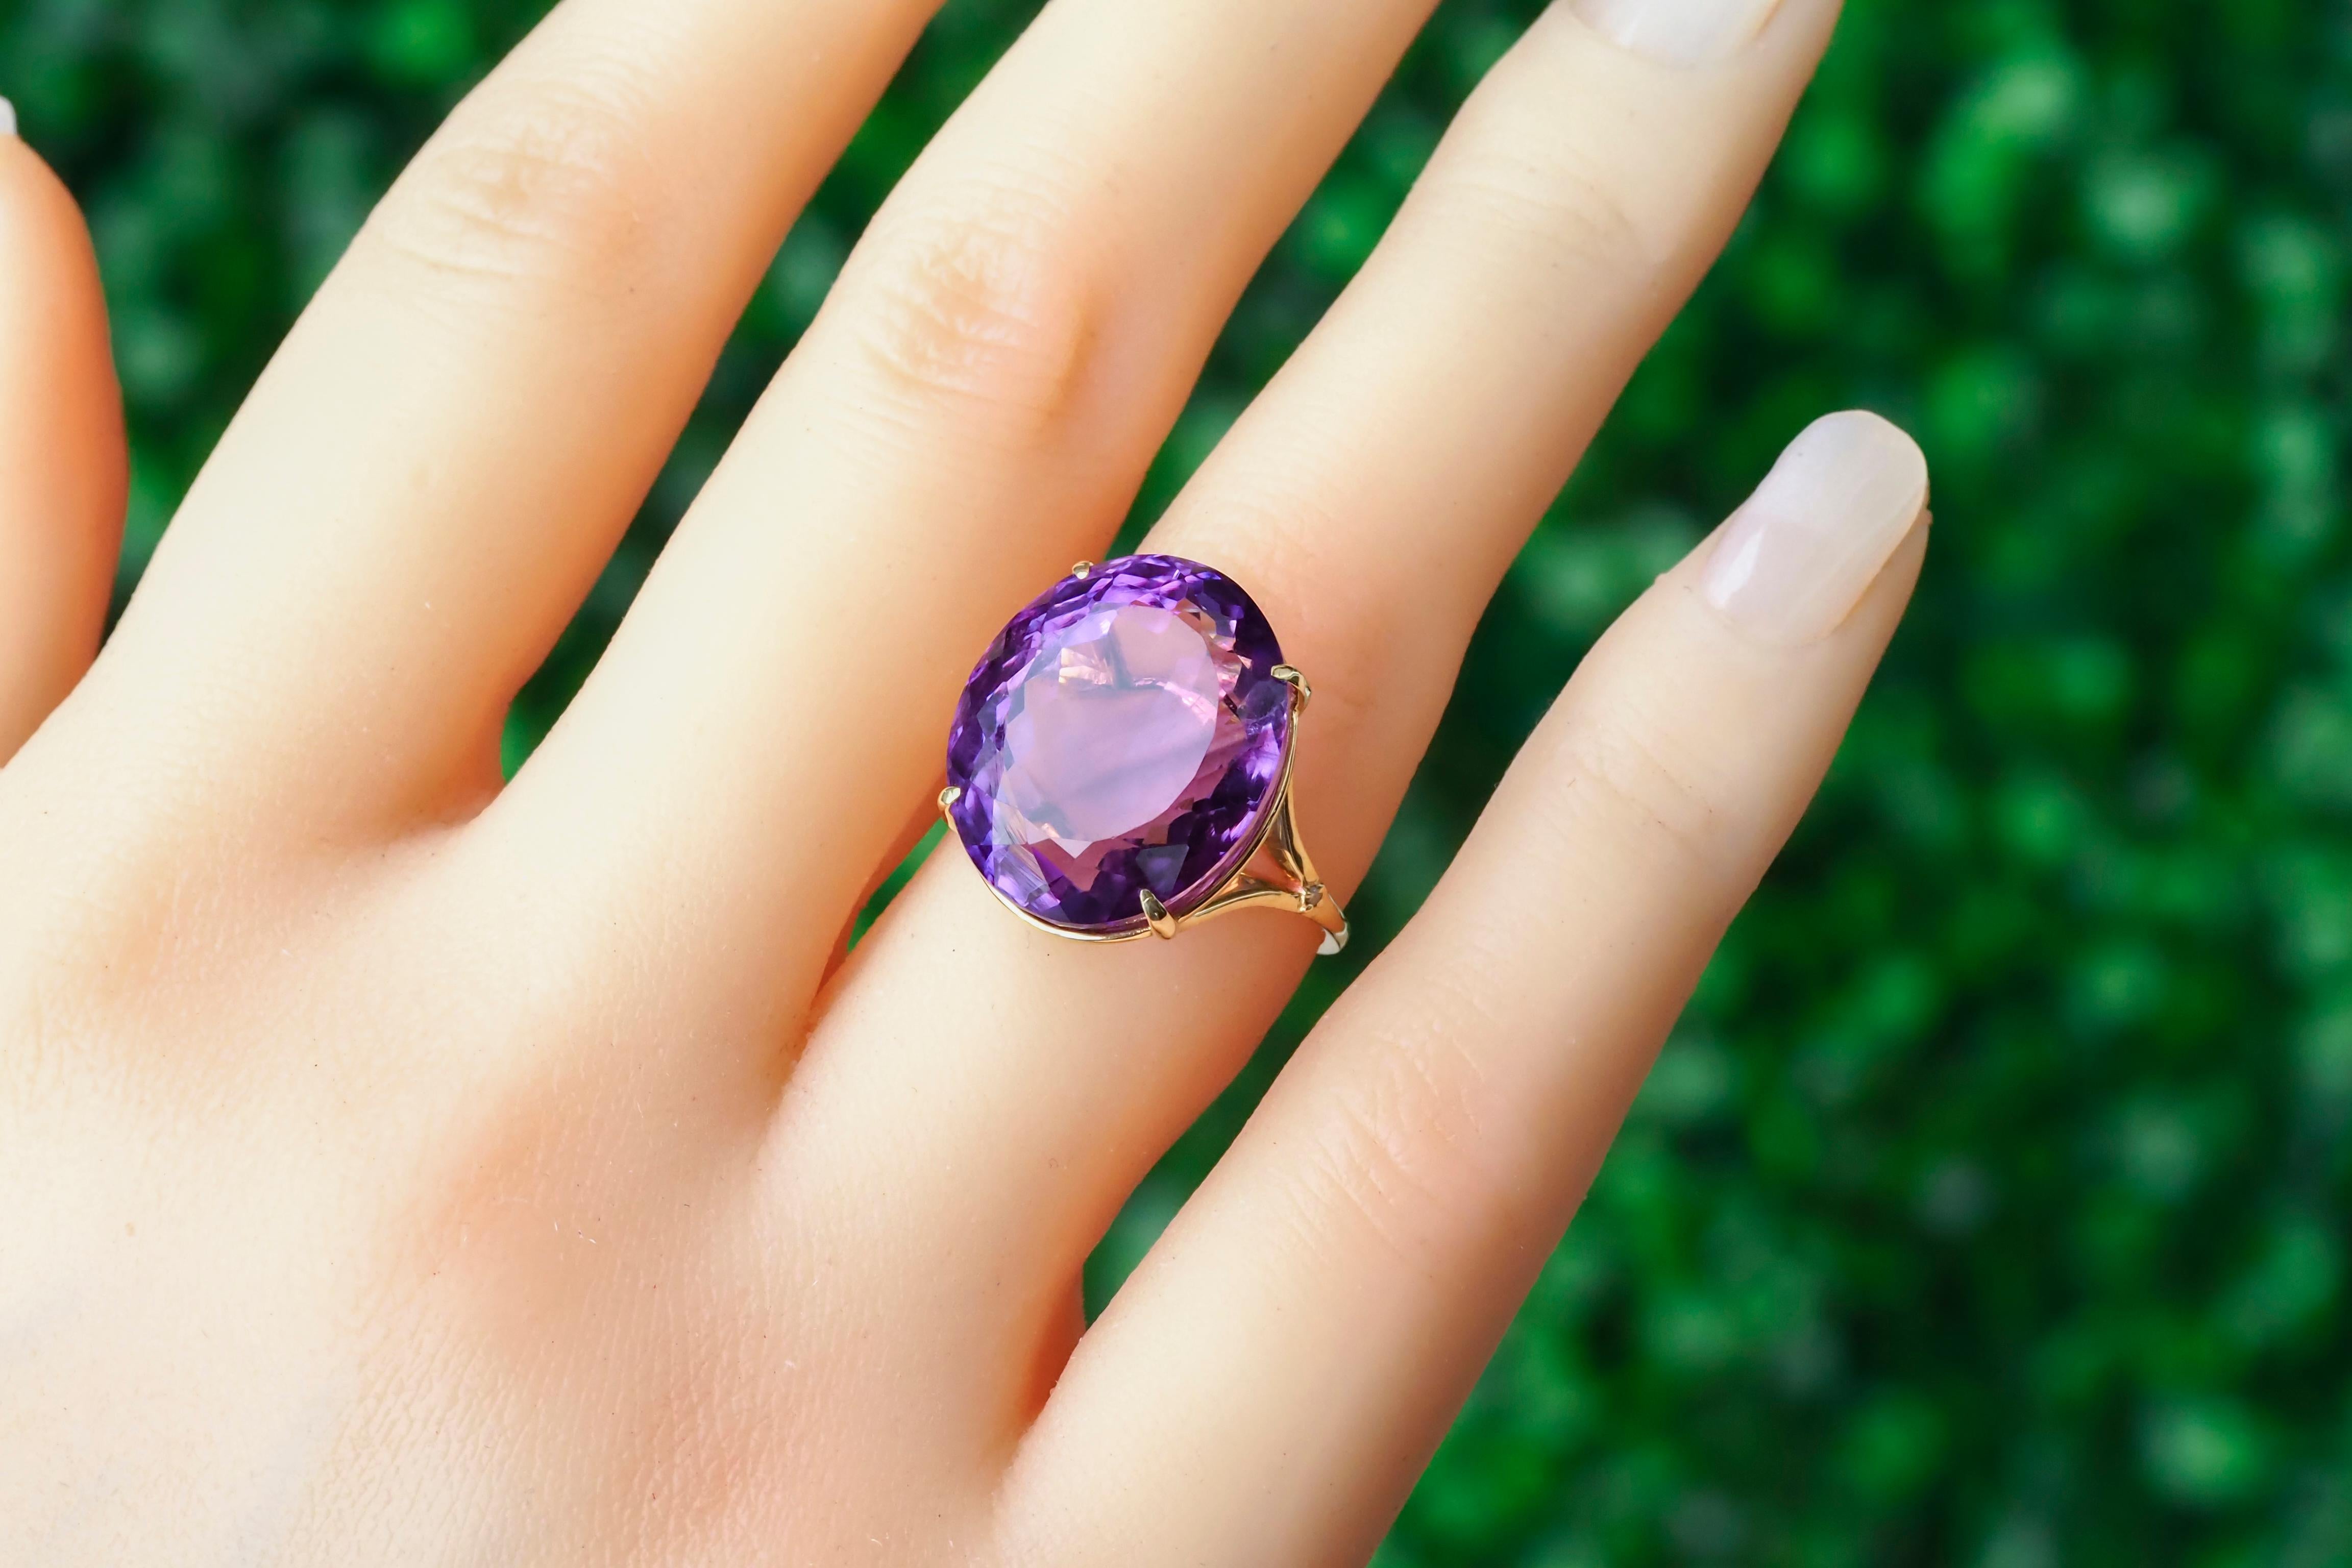 Metal type: Gold
Metal stamp: 14k Gold
Weight: 4.5 g. depends from size

Gemstones 

Set with amethyst, color violet
Oval cut, aprx 10 ct
Clarity: Transparent with inclusions (color lines)

Other stones

2 diamonds 0.01x2=0.02 ct (F/VS), round